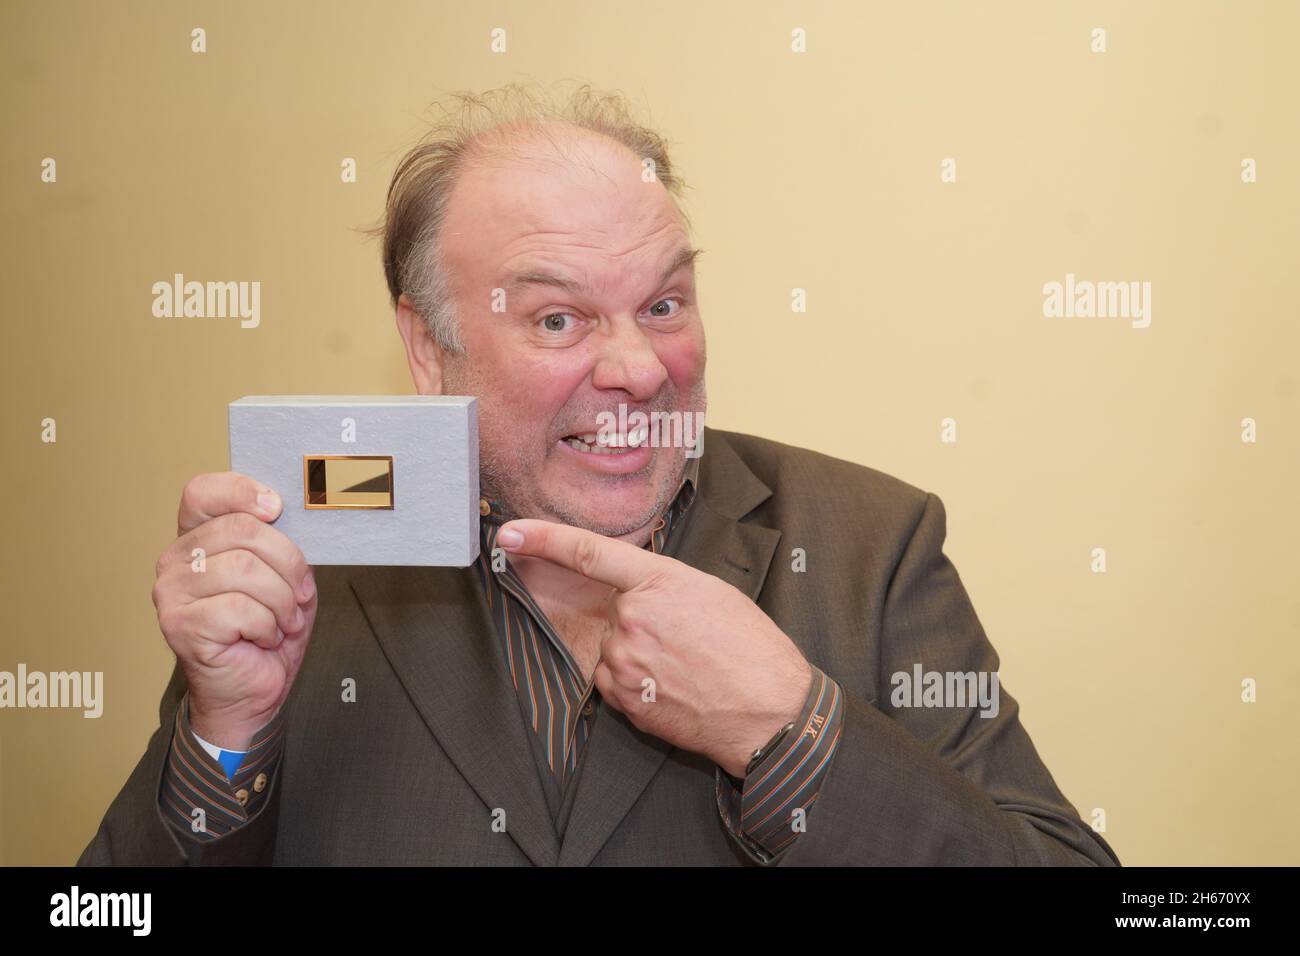 Berlin, Germany. 13th Nov, 2021. Actor Waldemar Kobus receives an award in the category 'Supporting Role' at the DAfF (German Academy for Television) awards ceremony at the Babylon cinema. Credit: Jörg Carstensen/dpa/Alamy Live News Stock Photo